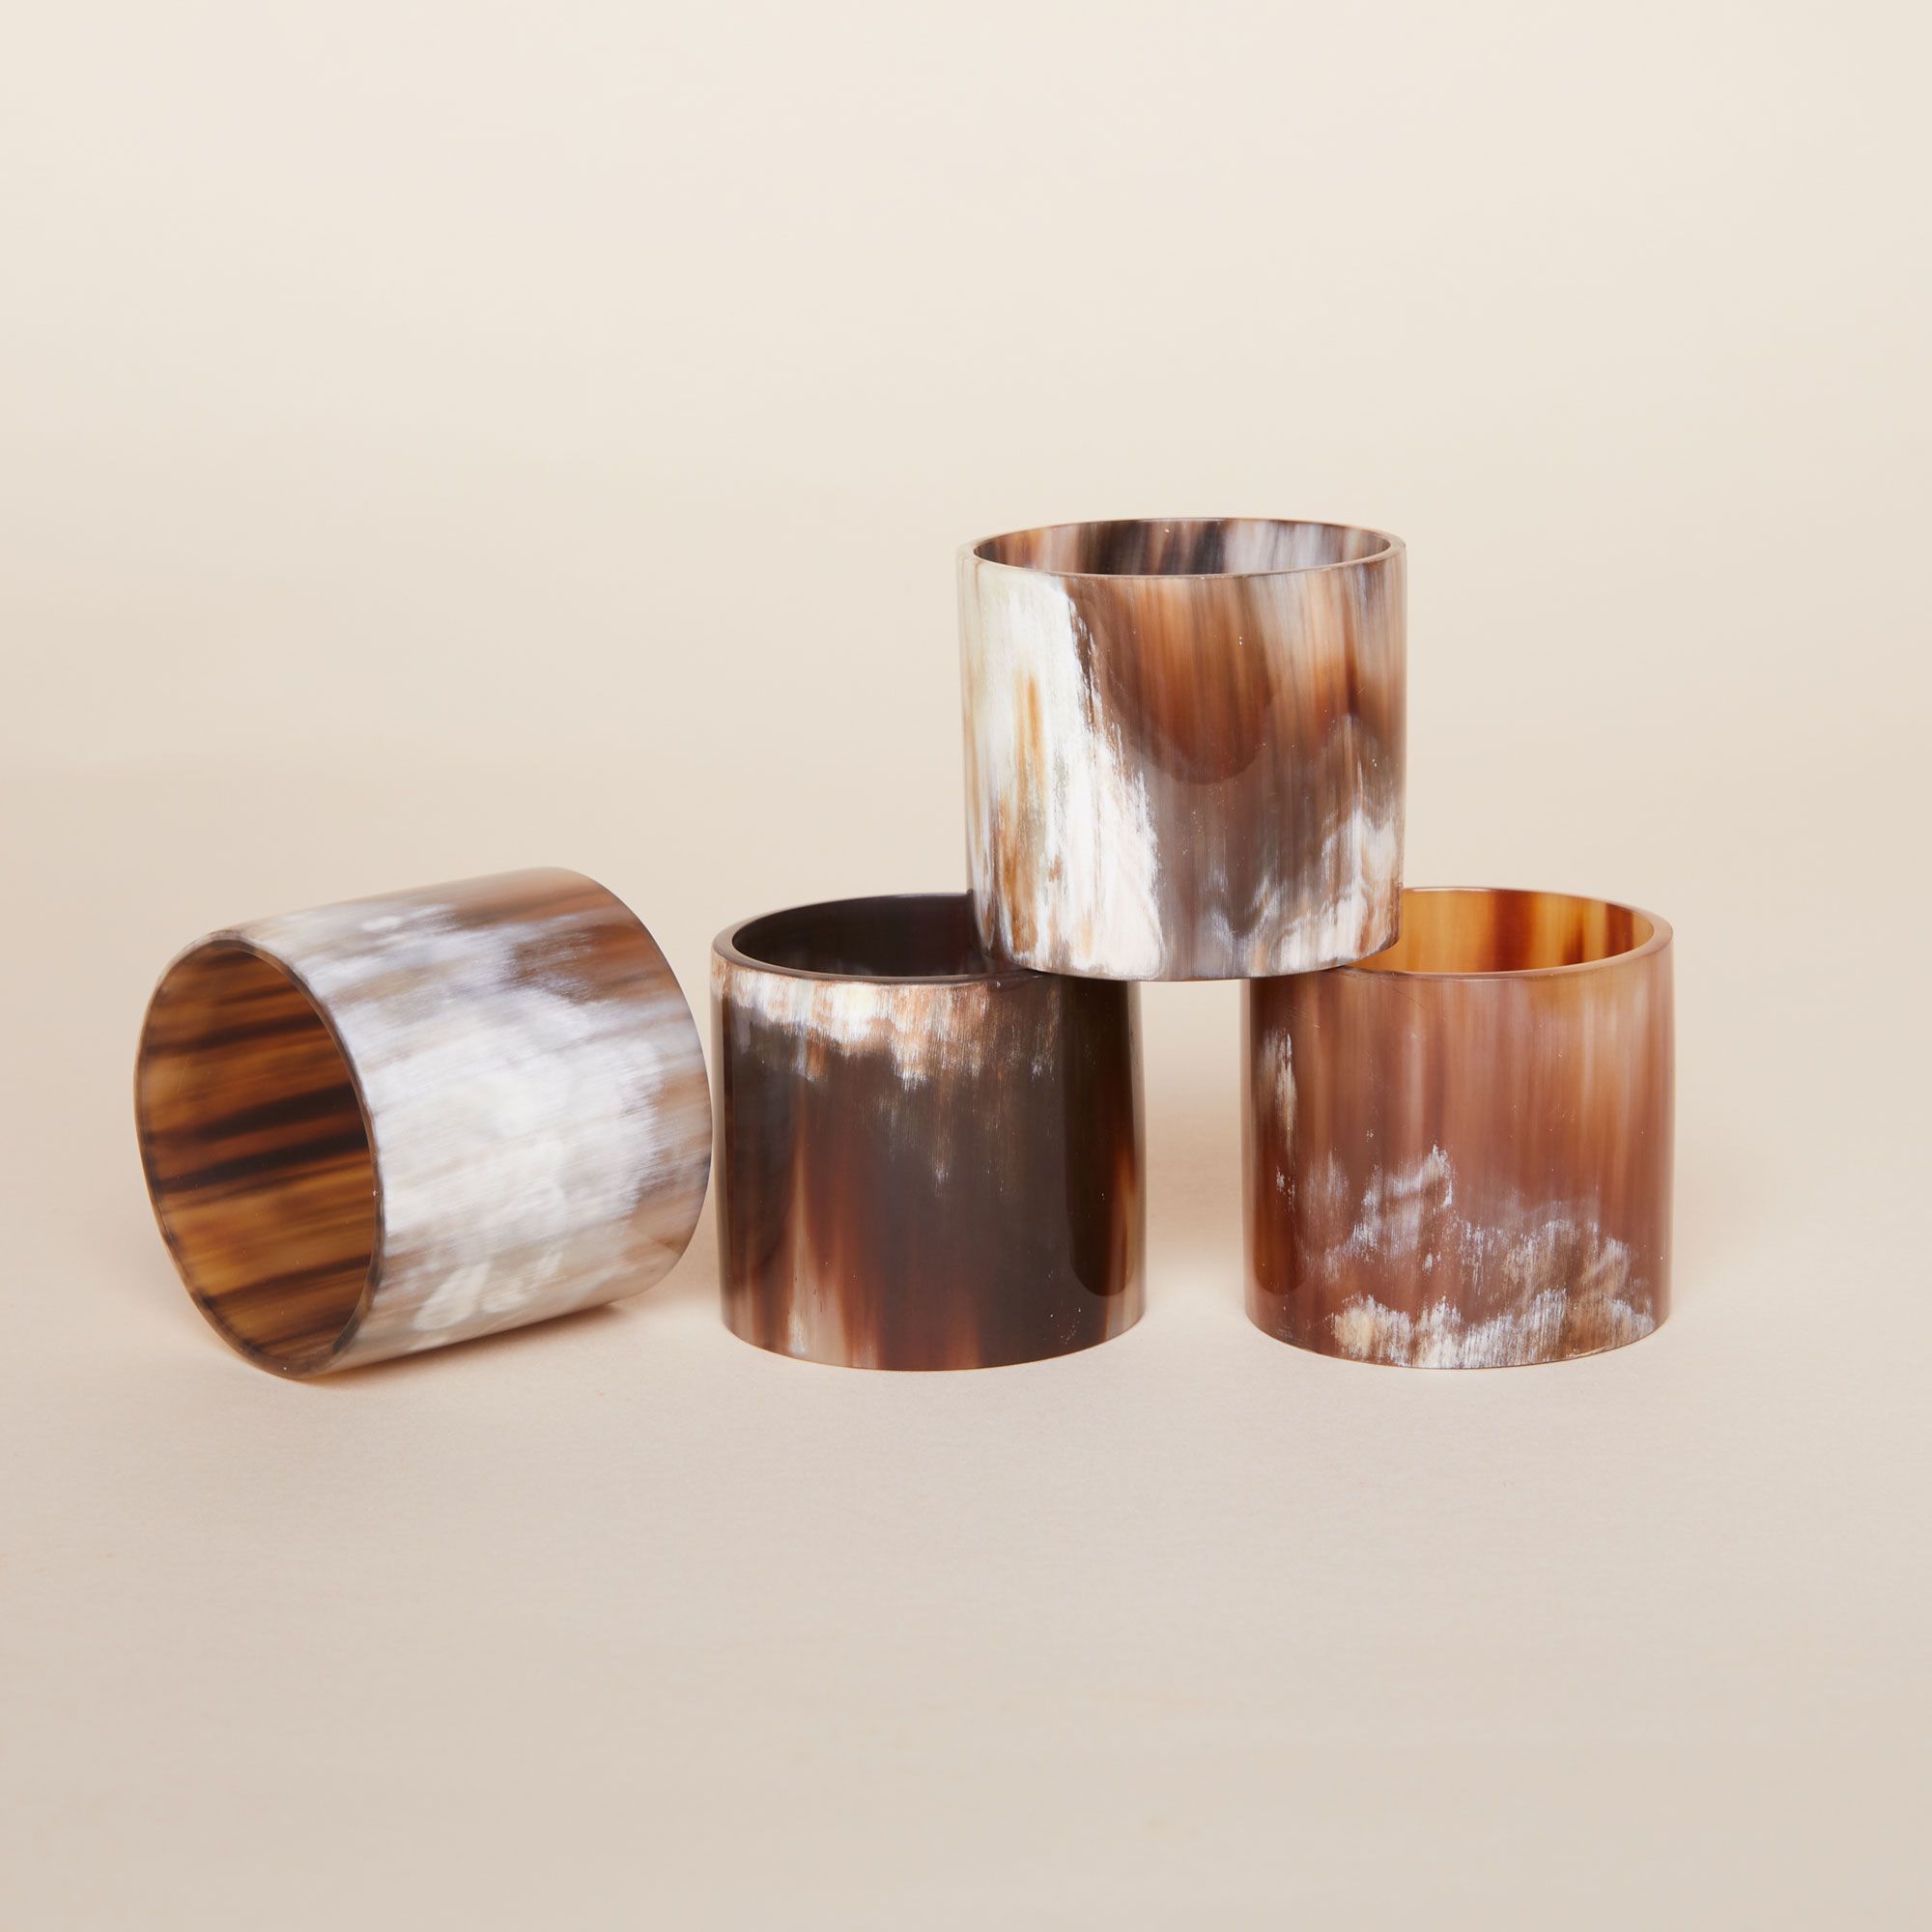 Four cylindrical napkin rings in shades of white, gray and brown